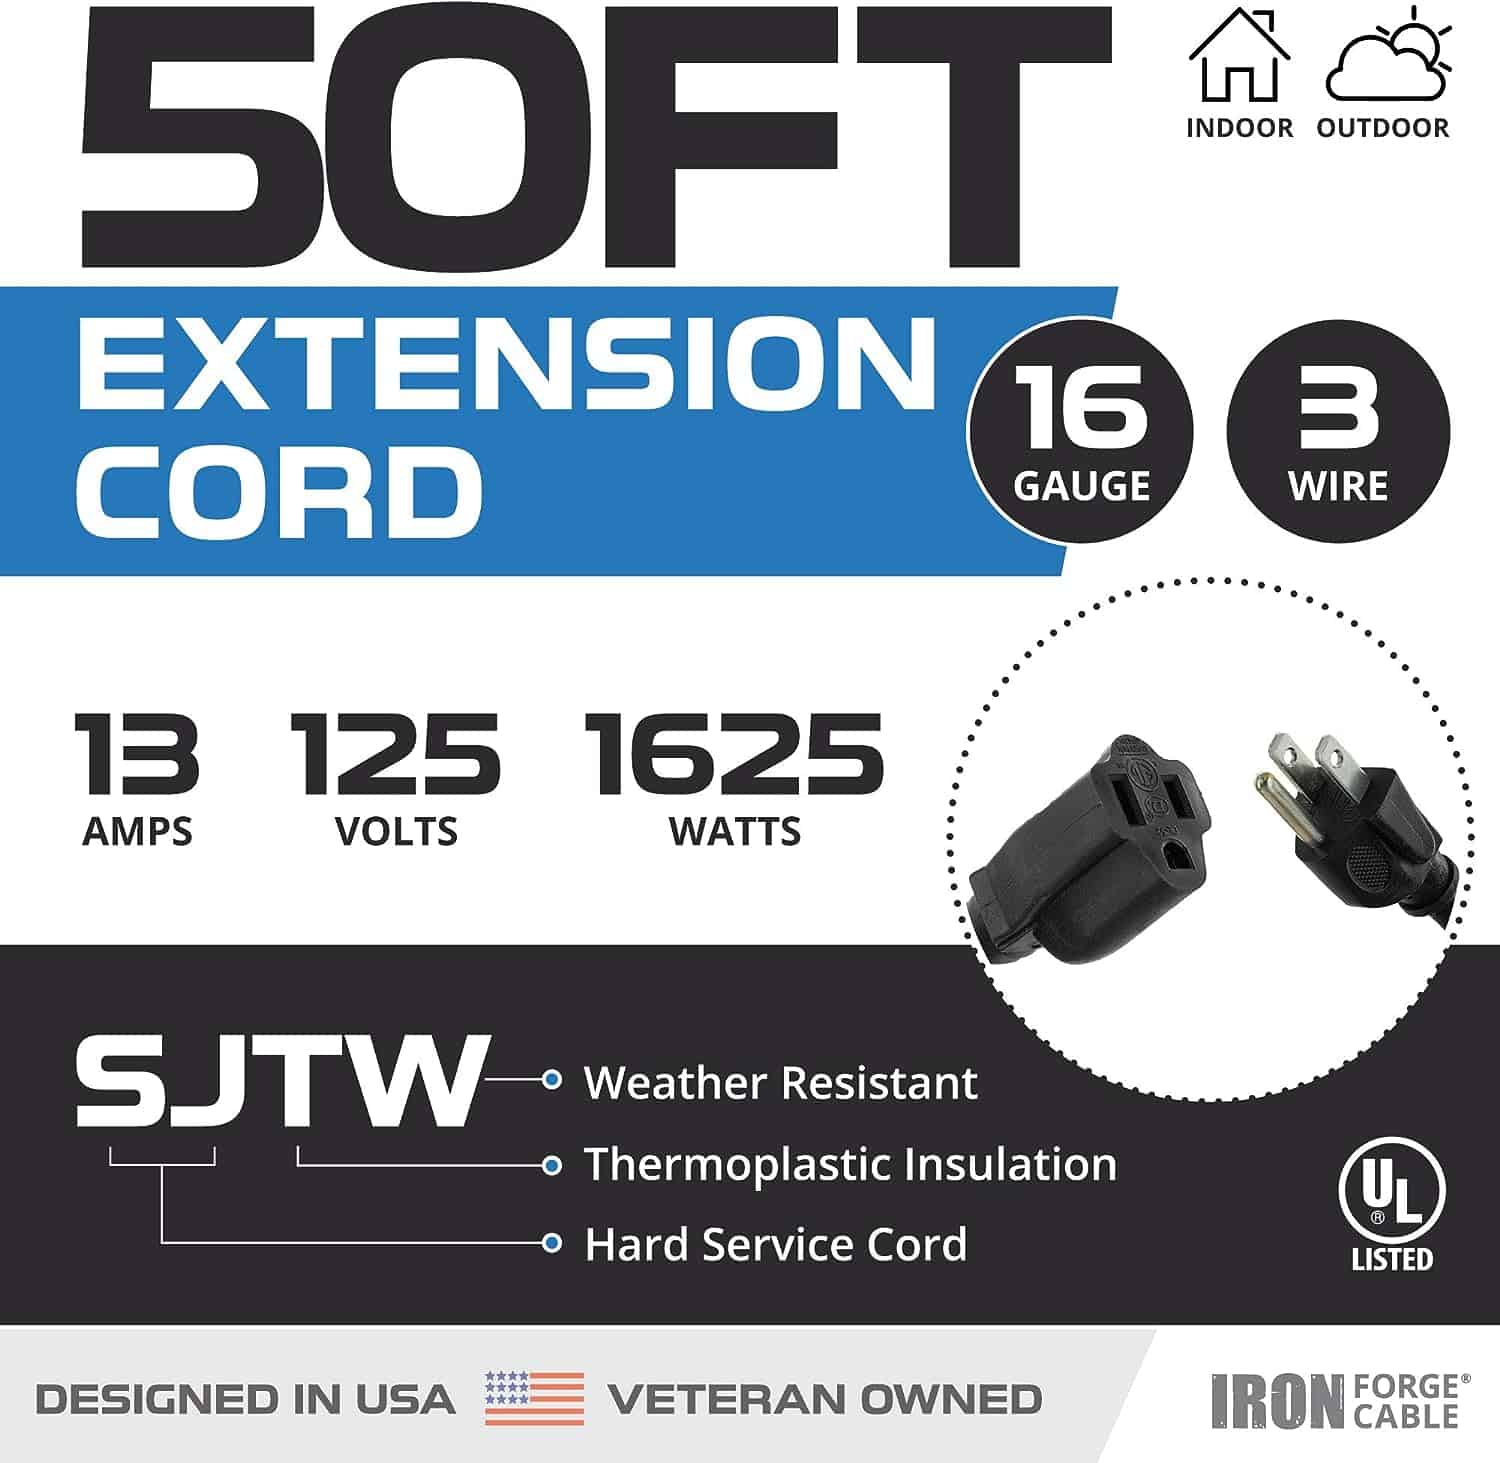 Iron Forge 50 Ft Extension Cord 16 3 Black 50 Foot Extension Cord Indoor Outdoor Use 3 Prong Weatherproof Exterior Extension Cord Great for Garden 2